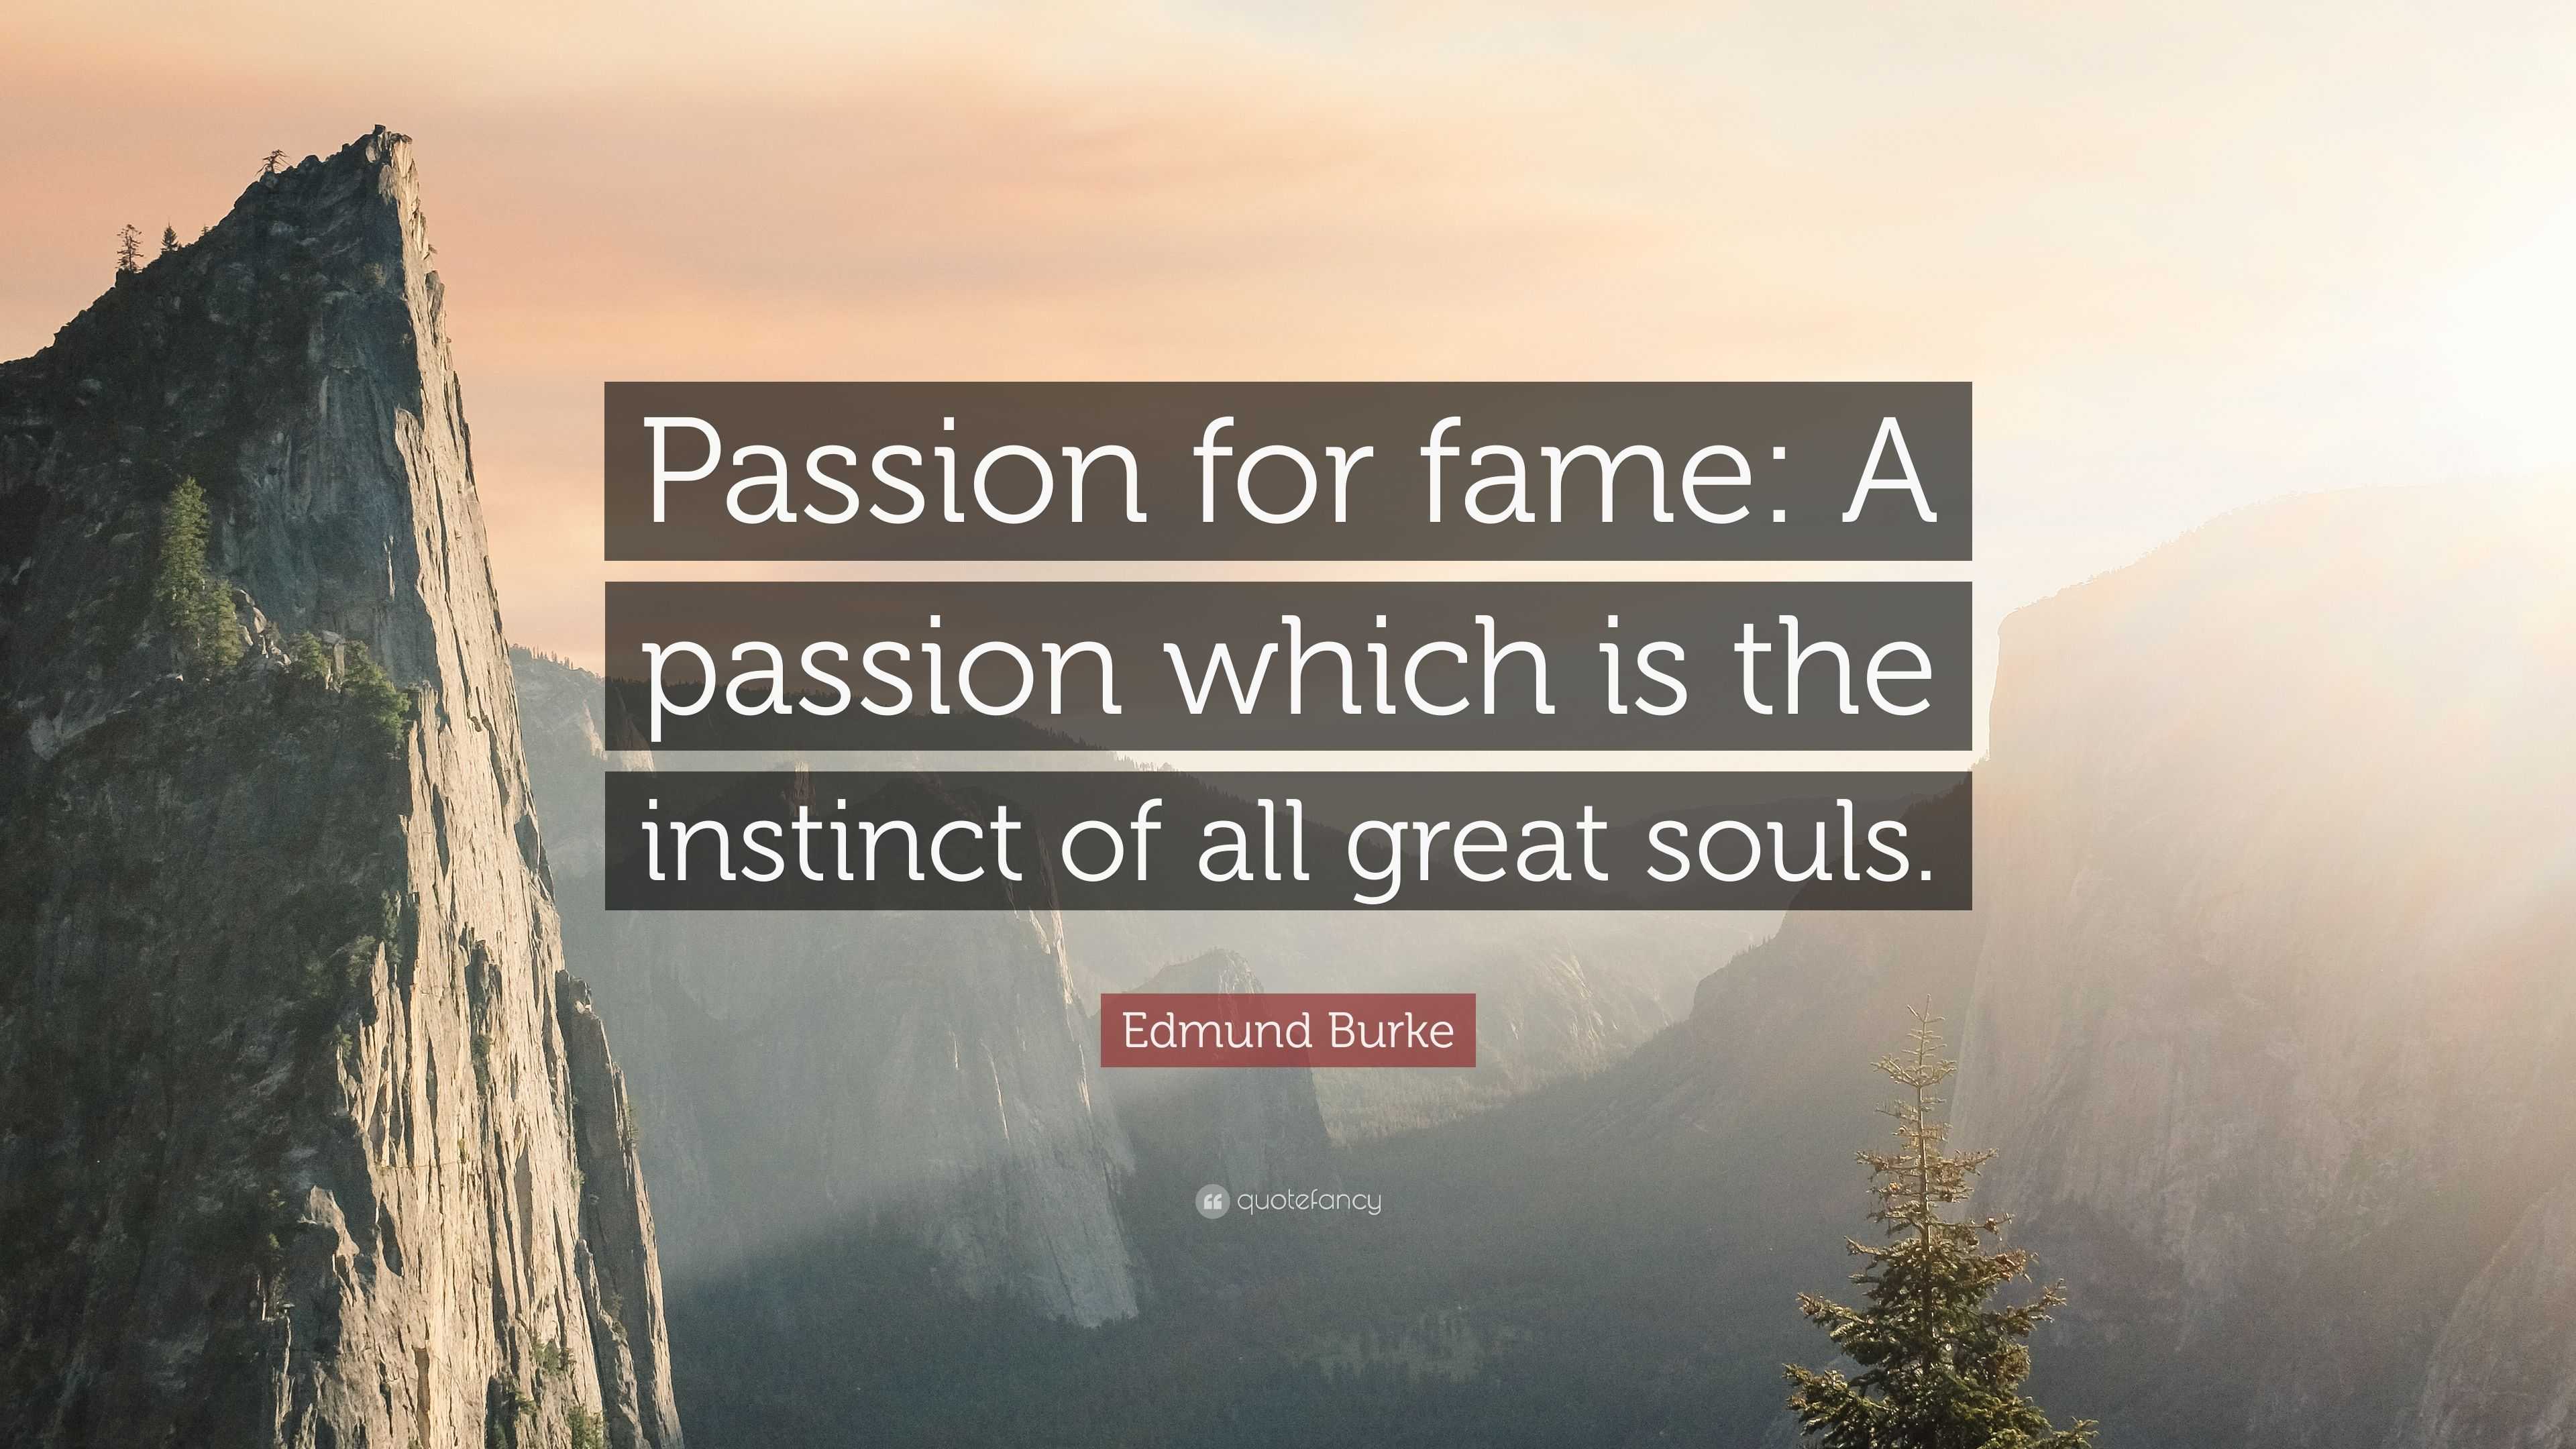 Edmund Burke Quote “passion For Fame A Passion Which Is The Instinct Of All Great Souls ”